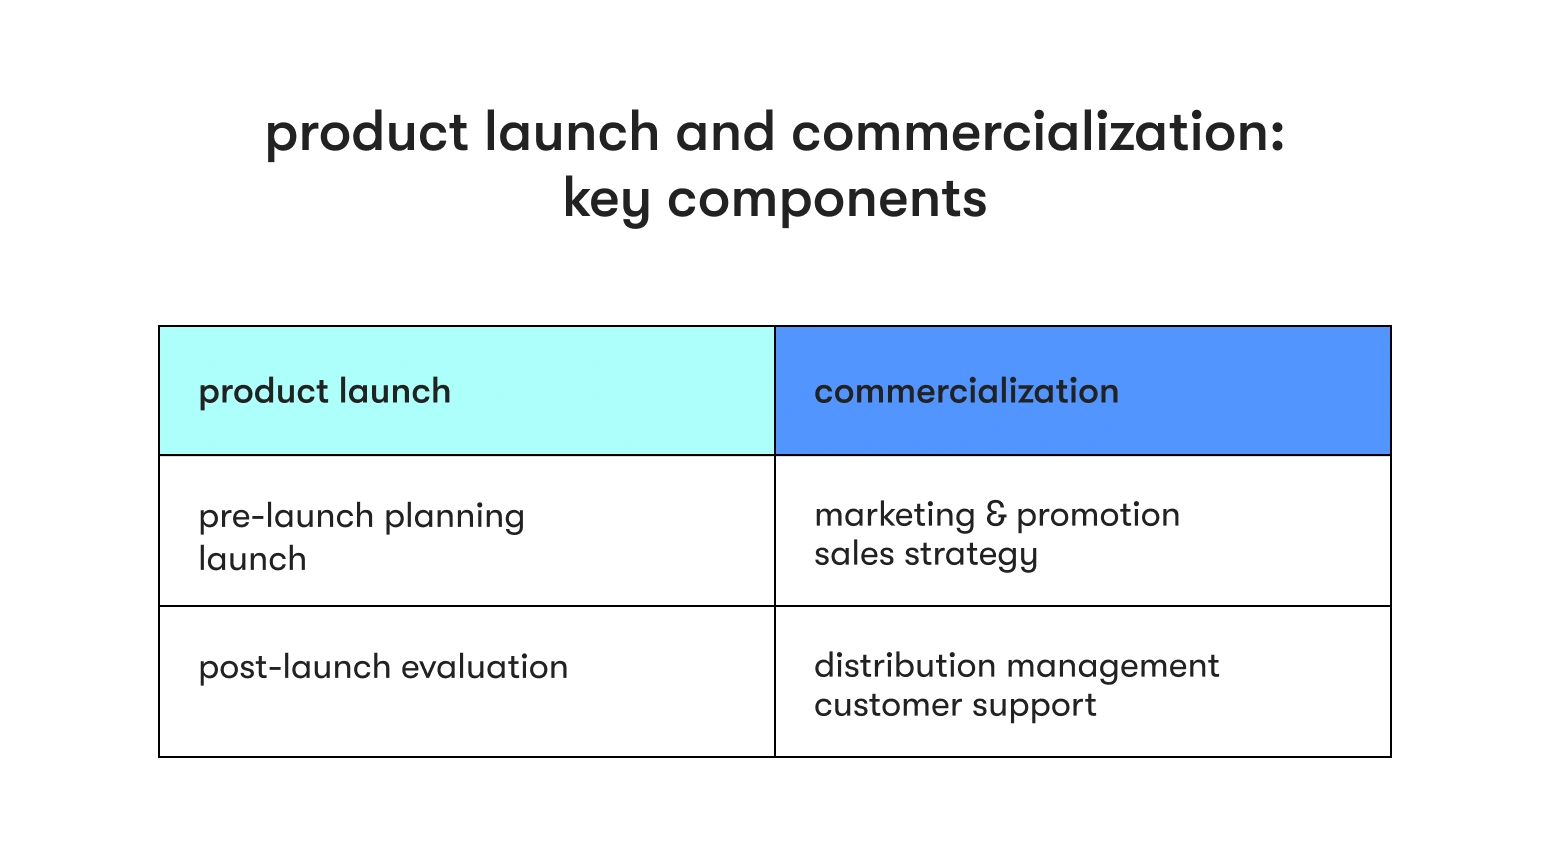 product launch and commercialization in the new product development process: key components